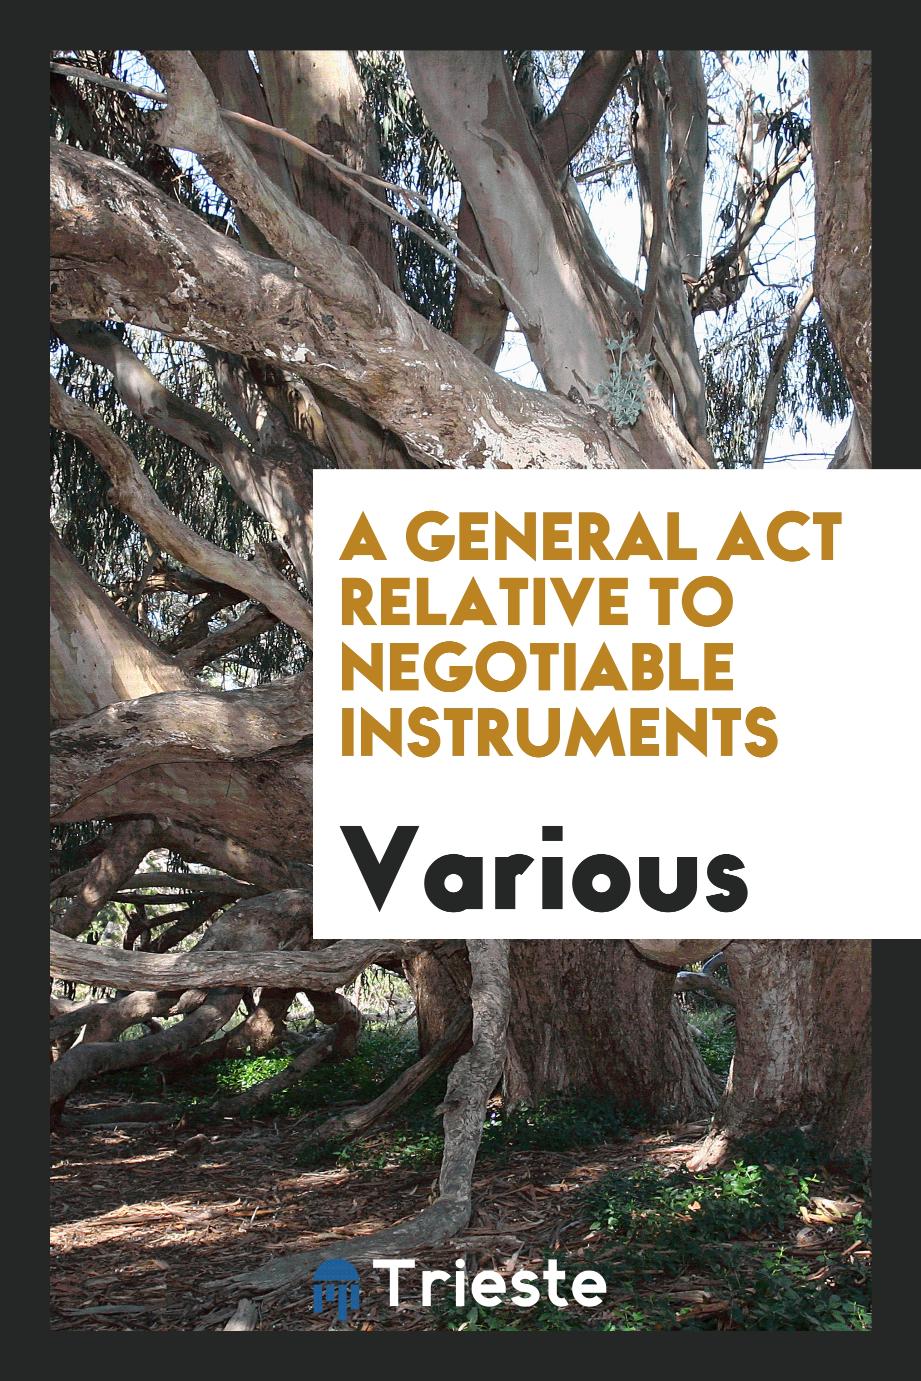 A general act relative to negotiable instruments